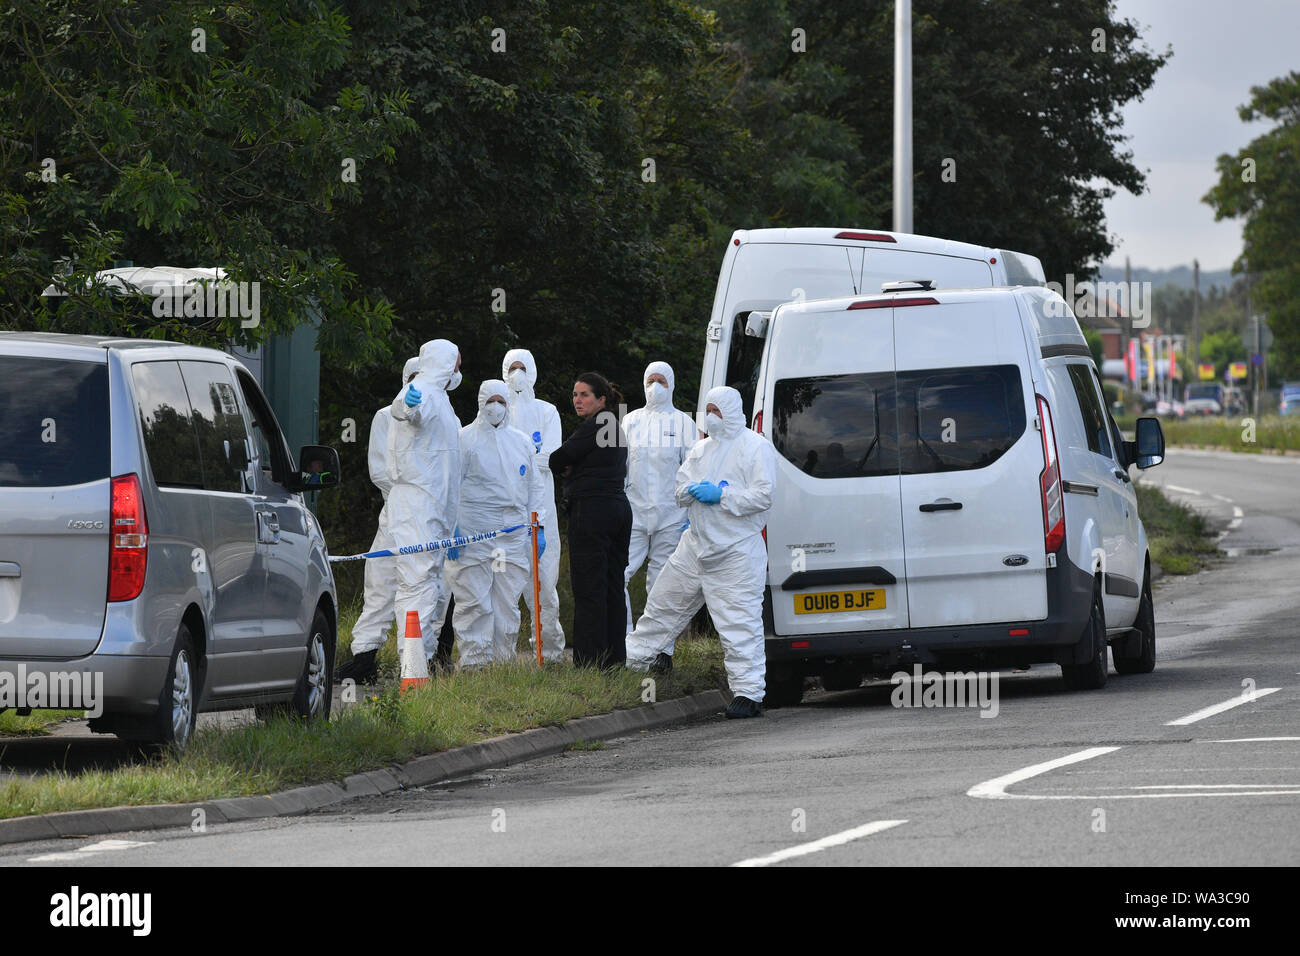 Police forensic officers at the scene, where Thames Valley Police officer Pc Andrew Harper, 28, died following a 'serious incident' at about 11.30pm on Thursday near the A4 Bath Road, between Reading and Newbury, at the village of Sulhamstead in Berkshire. Stock Photo